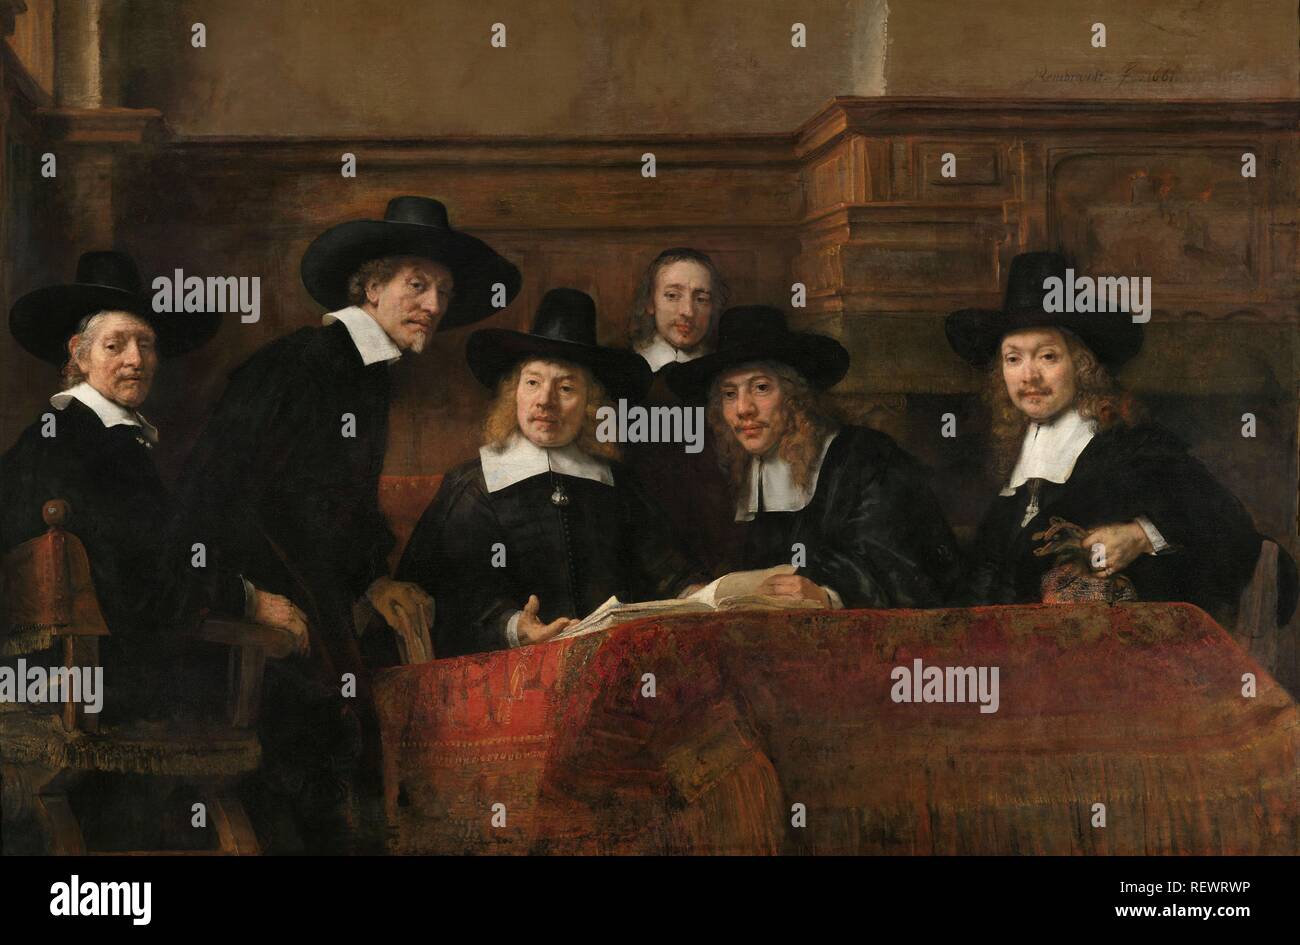 The Wardens of the Amsterdam Drapers' Guild, Known as 'The Syndics'. The Sampling Officials of the Amsterdam Drapers' Guild, known as 'The Syndics'. Dating: 1662. Measurements: h 191.5 cm × w 279 cm. Museum: Rijksmuseum, Amsterdam. Author: REMBRANDT, HARMENSZOON VAN RIJN. REMBRANDT HARMENSZOON VAN RIJN. Rembrandt van Rhijn. Stock Photo